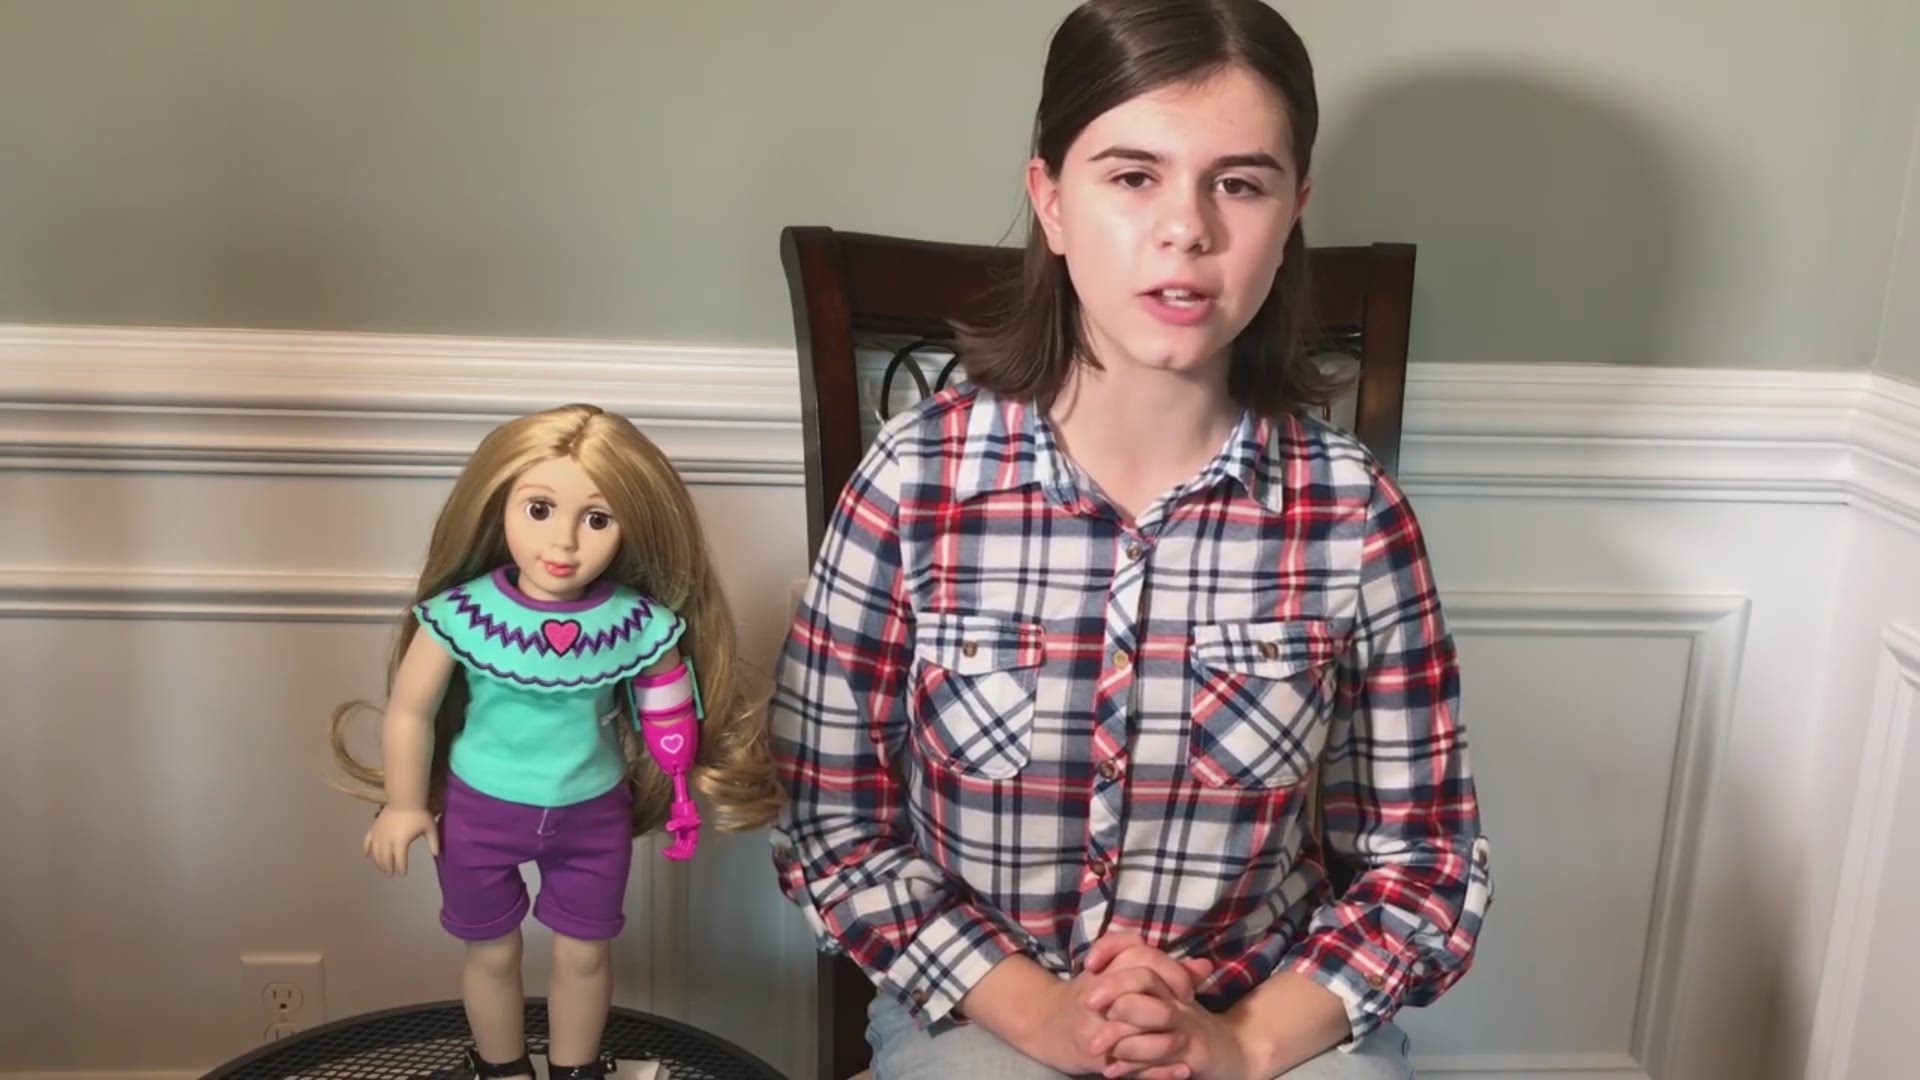 Elliana Ellington is an 11-year-old girl with a prosthetic arm who's passionate about technology like coding, robotics, and 3D printing. She's not just a doll; she's a character Sydney brought to life through an e-book.